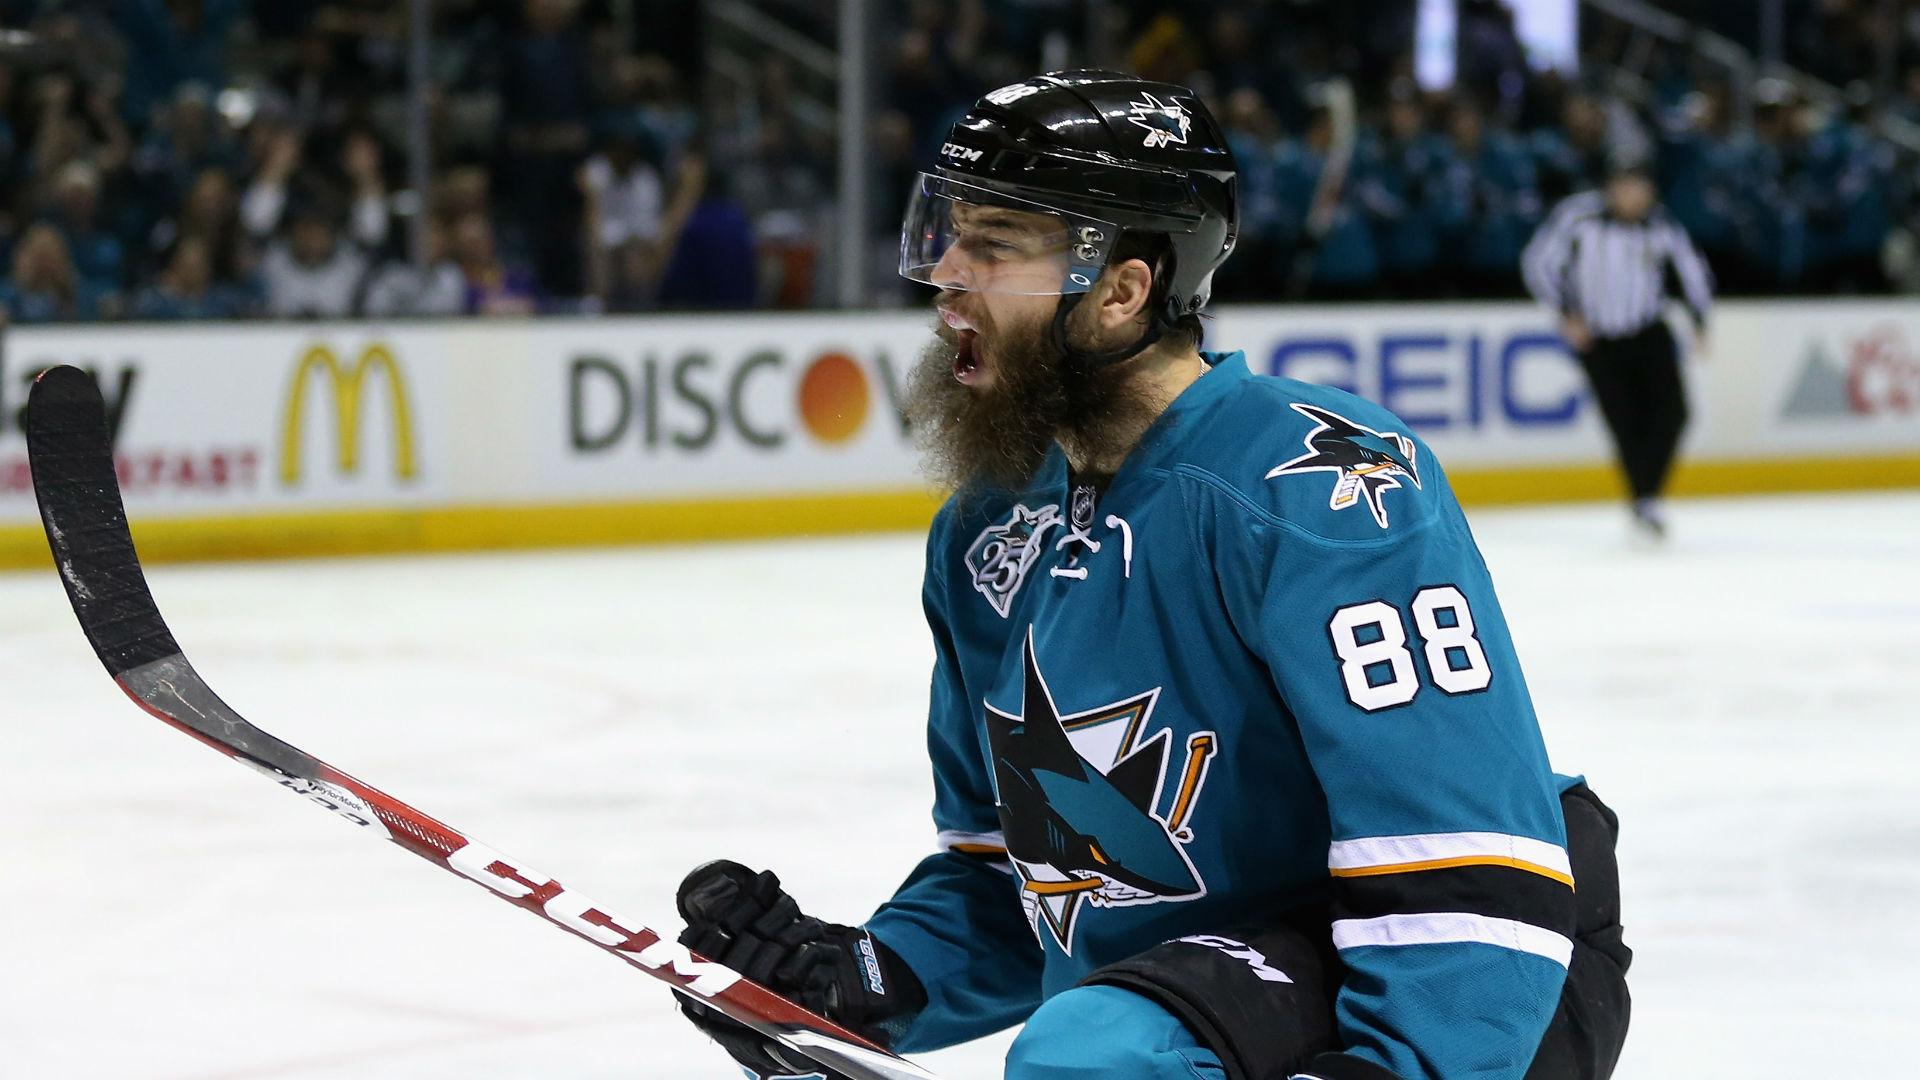 Brent Burns' New Sharks Contract Puts Him Among NHL's Highest Paid